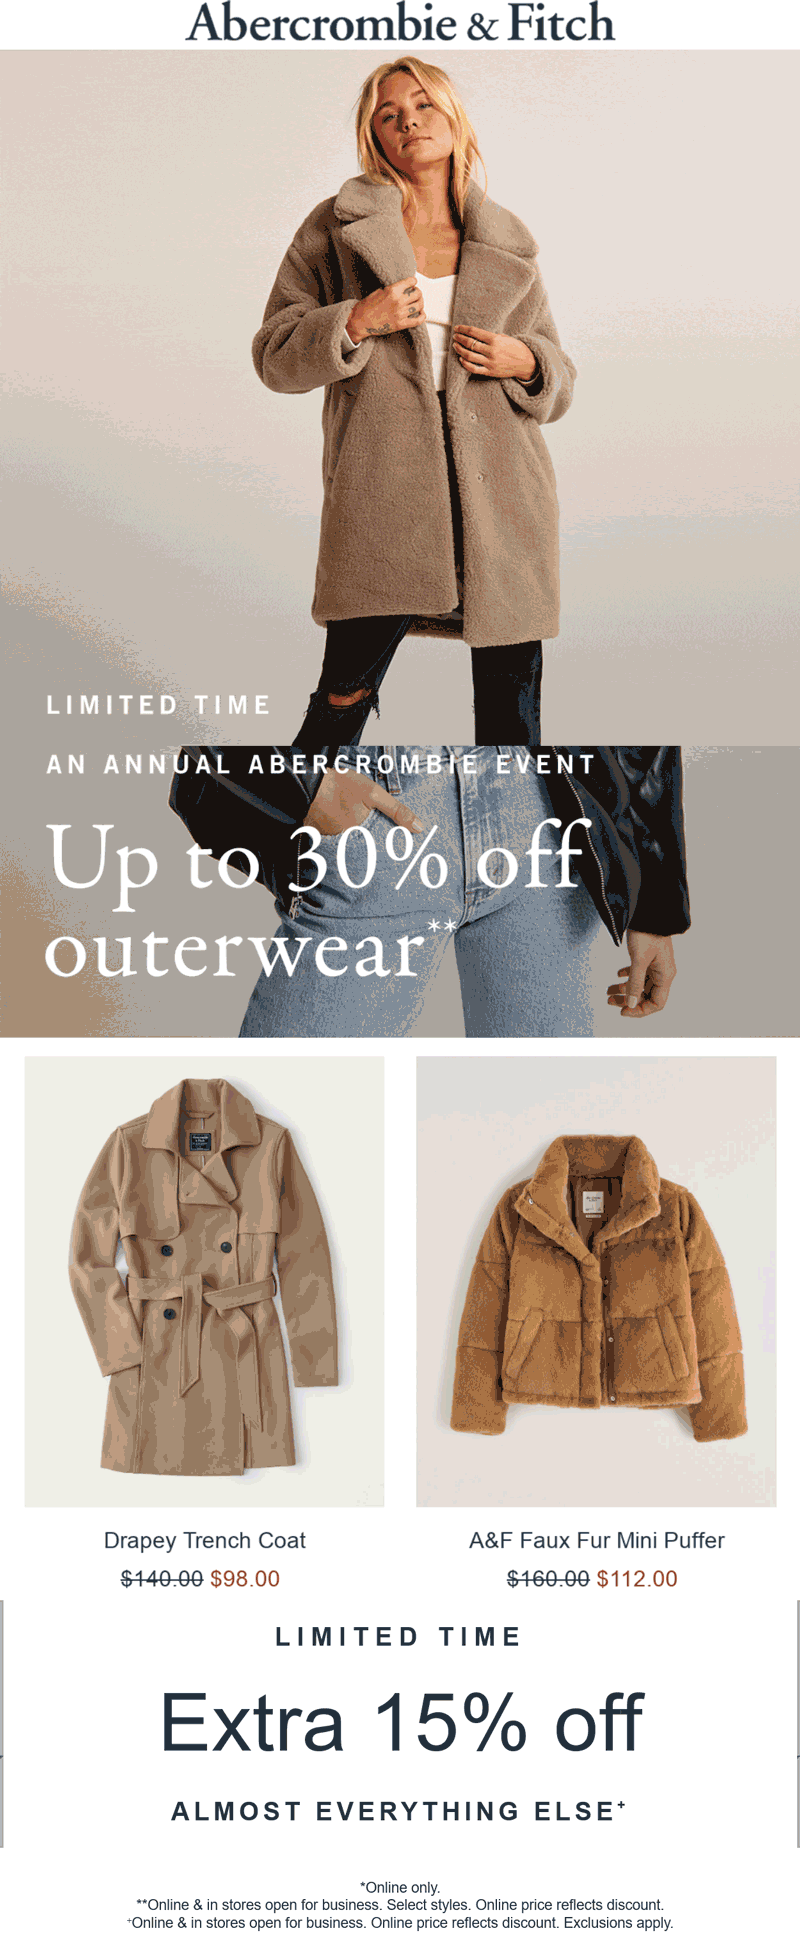 Abercrombie & Fitch stores Coupon  15-30% off online at Abercrombie & Fitch #abercrombiefitch 